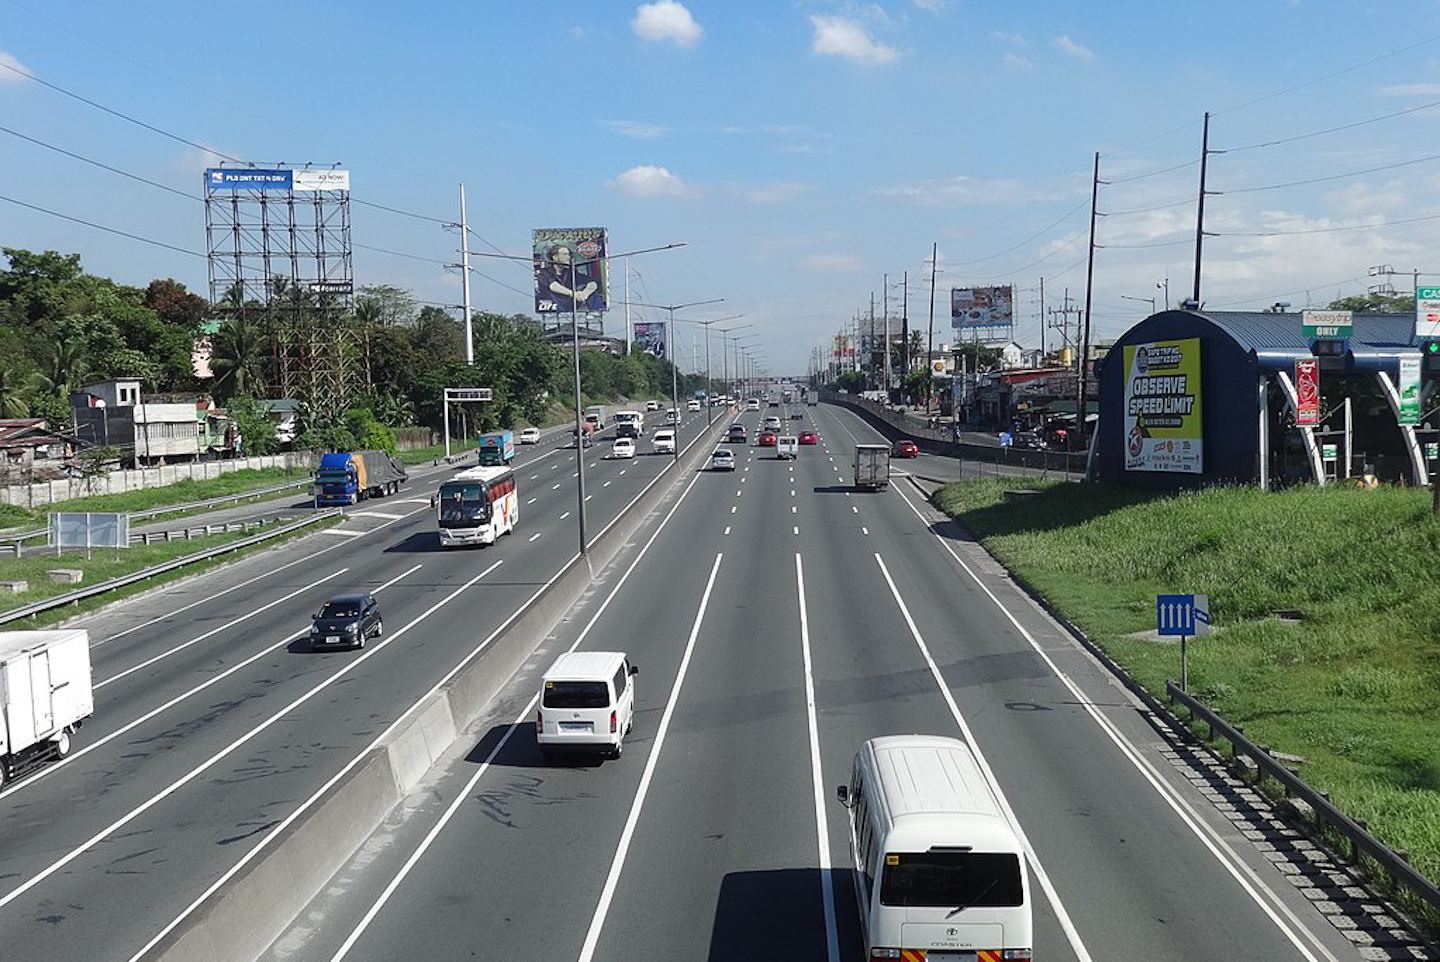 NLEX Corp. announces Toll Fee increase; set for May 12 implementation